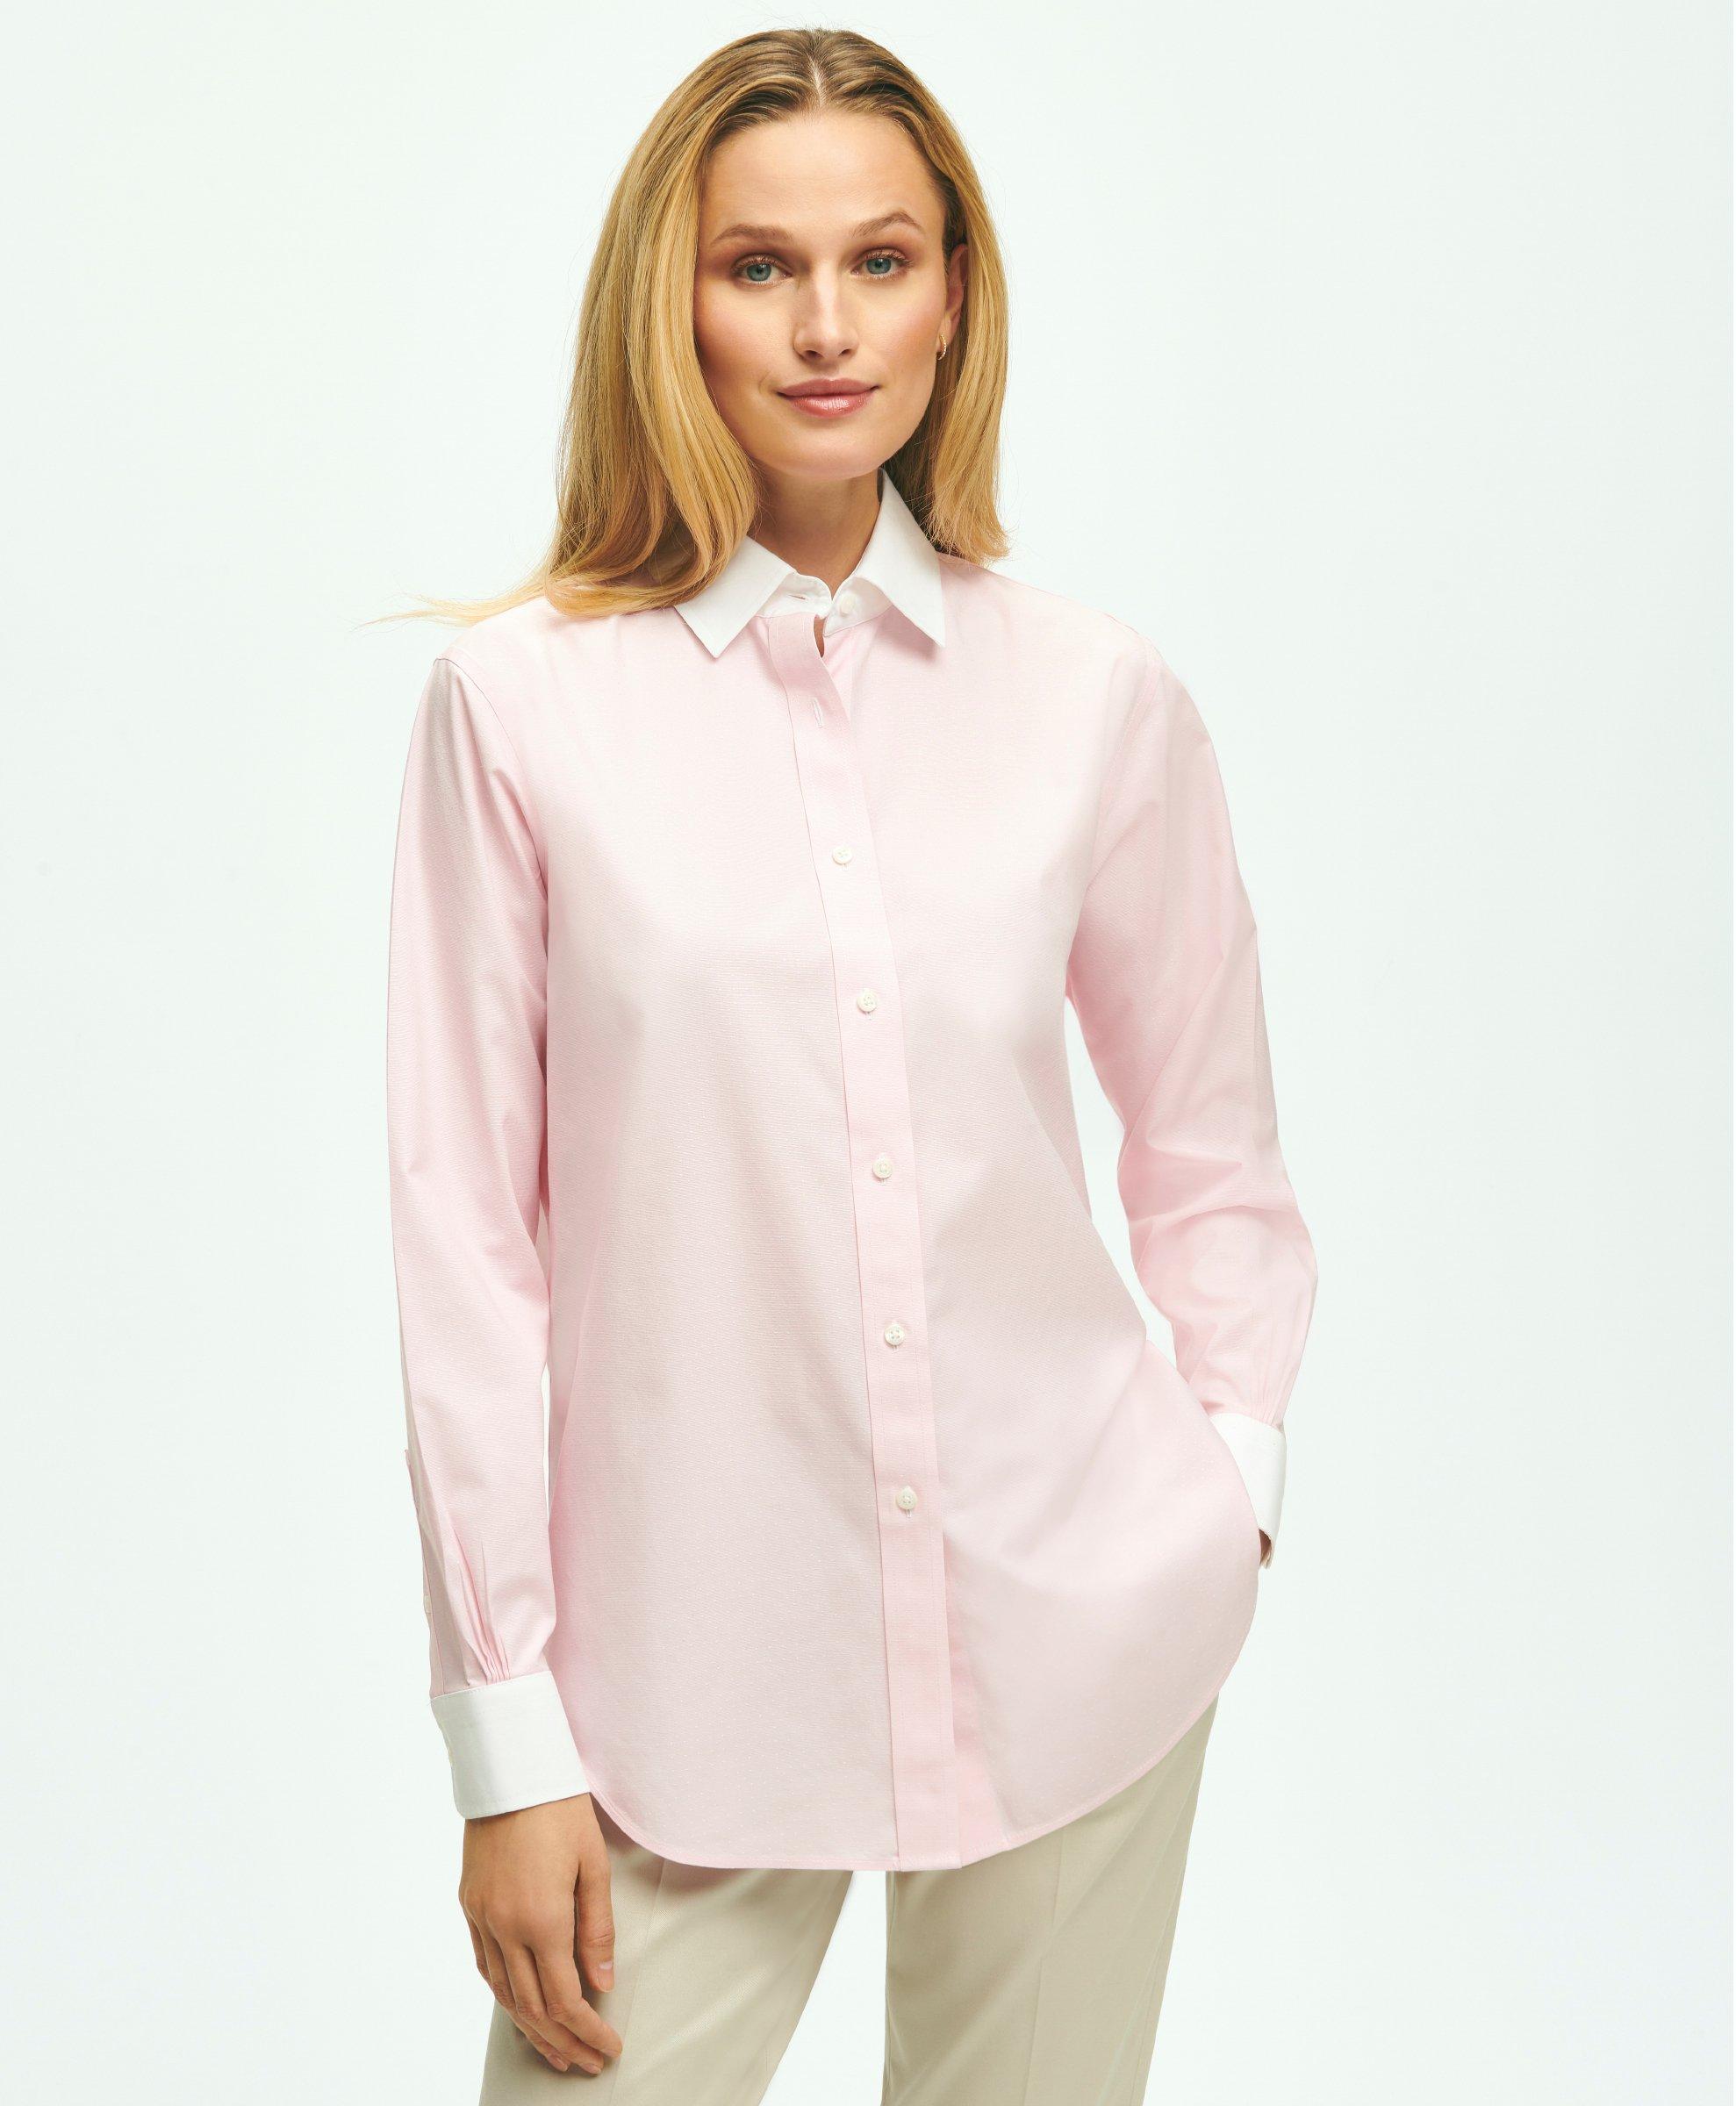 Brooks Brothers Relaxed Fit Non-iron Stretch Supima Cotton Shirt With White Collar & Cuffs | Dark Pink | Size 12